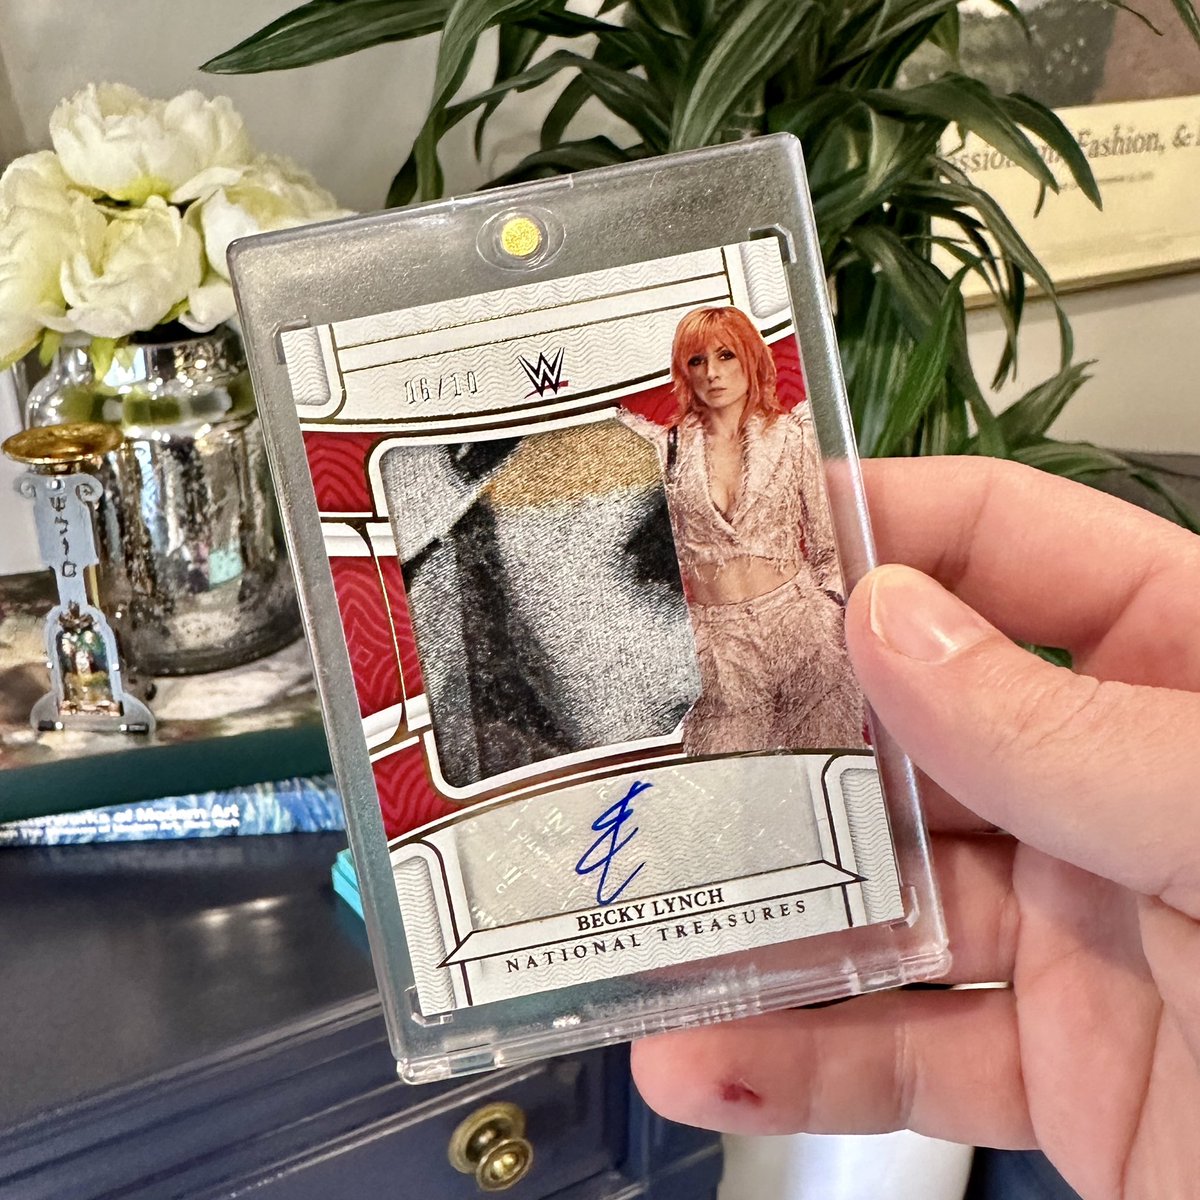 Nice to pick up a three-color relic even if it’s upside down! 😝

#wrestlingcards #wwecards #wweprizm #panini #beckylynch #nationaltreasures #whodoyoucollect #thehobby